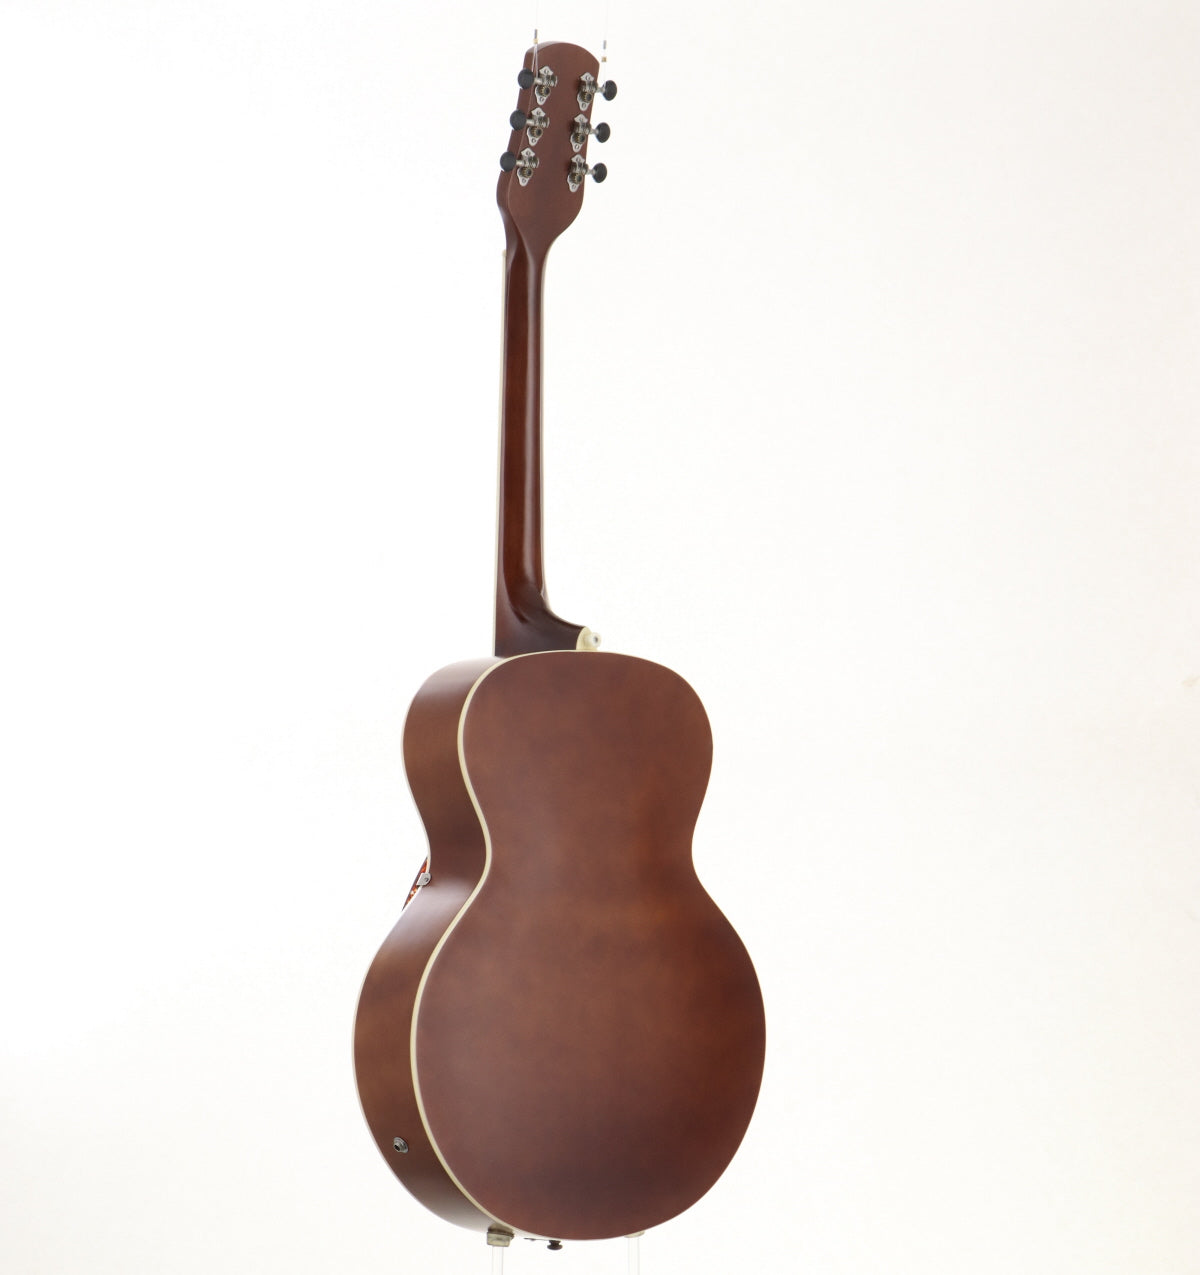 [SN CAXR156078] USED ELECTROMATIC BY GRETSCH / G9555 New Yorker Archtop with Pickup [03]